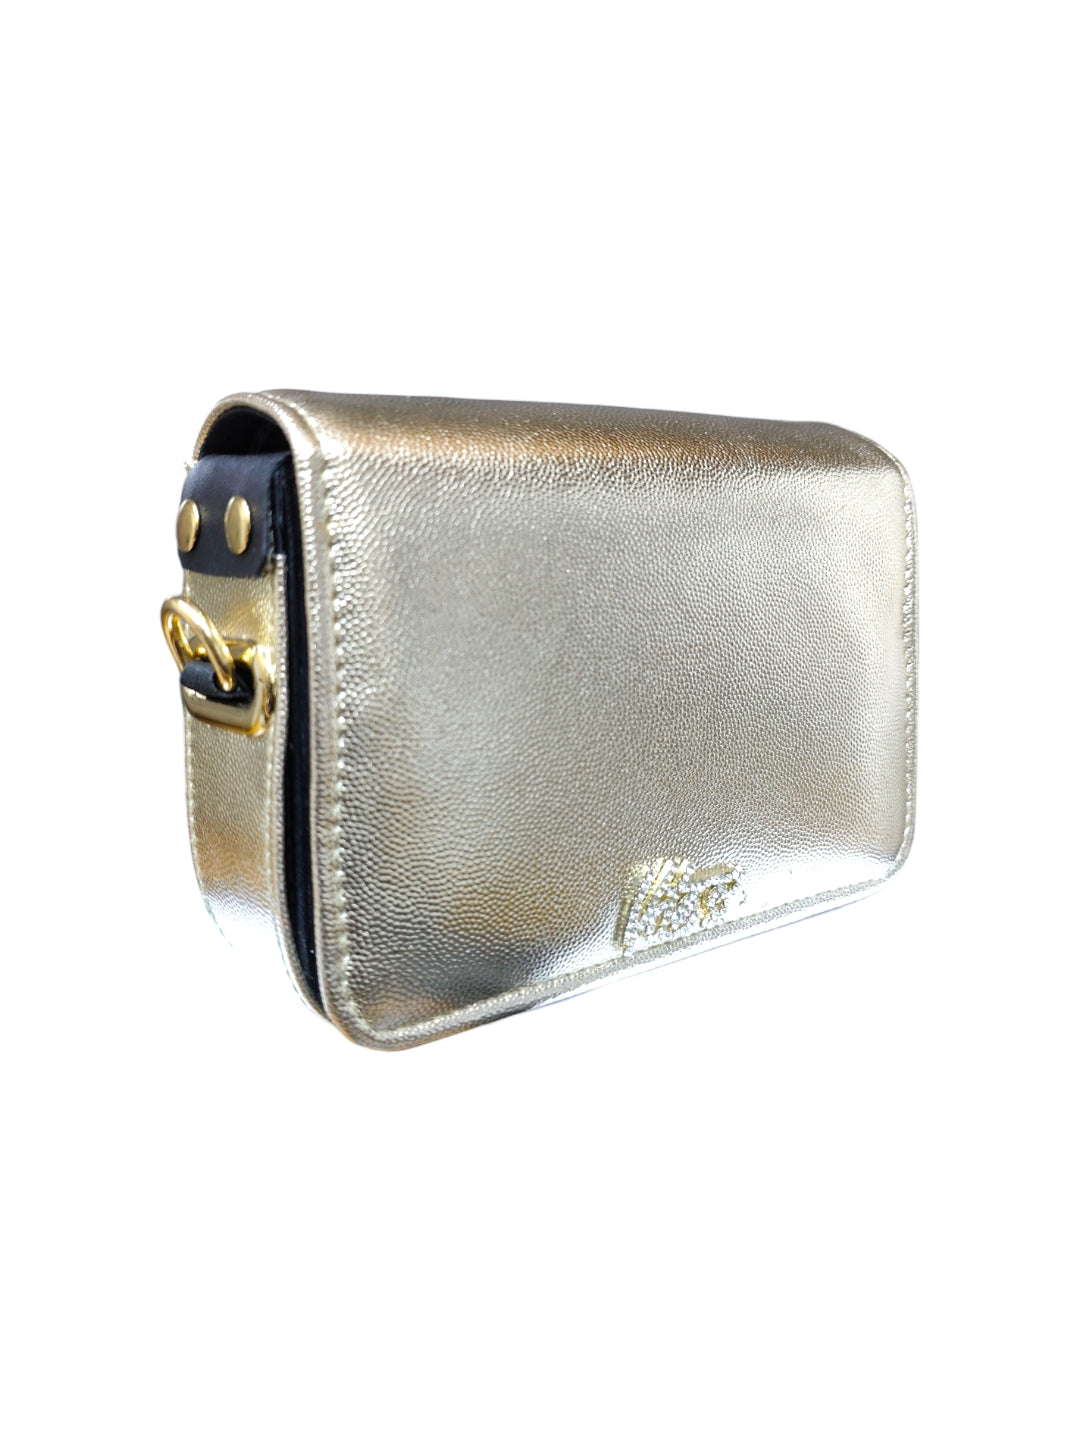 Elevate your ensemble with this chic and practical accessory that's as versatile as you are.